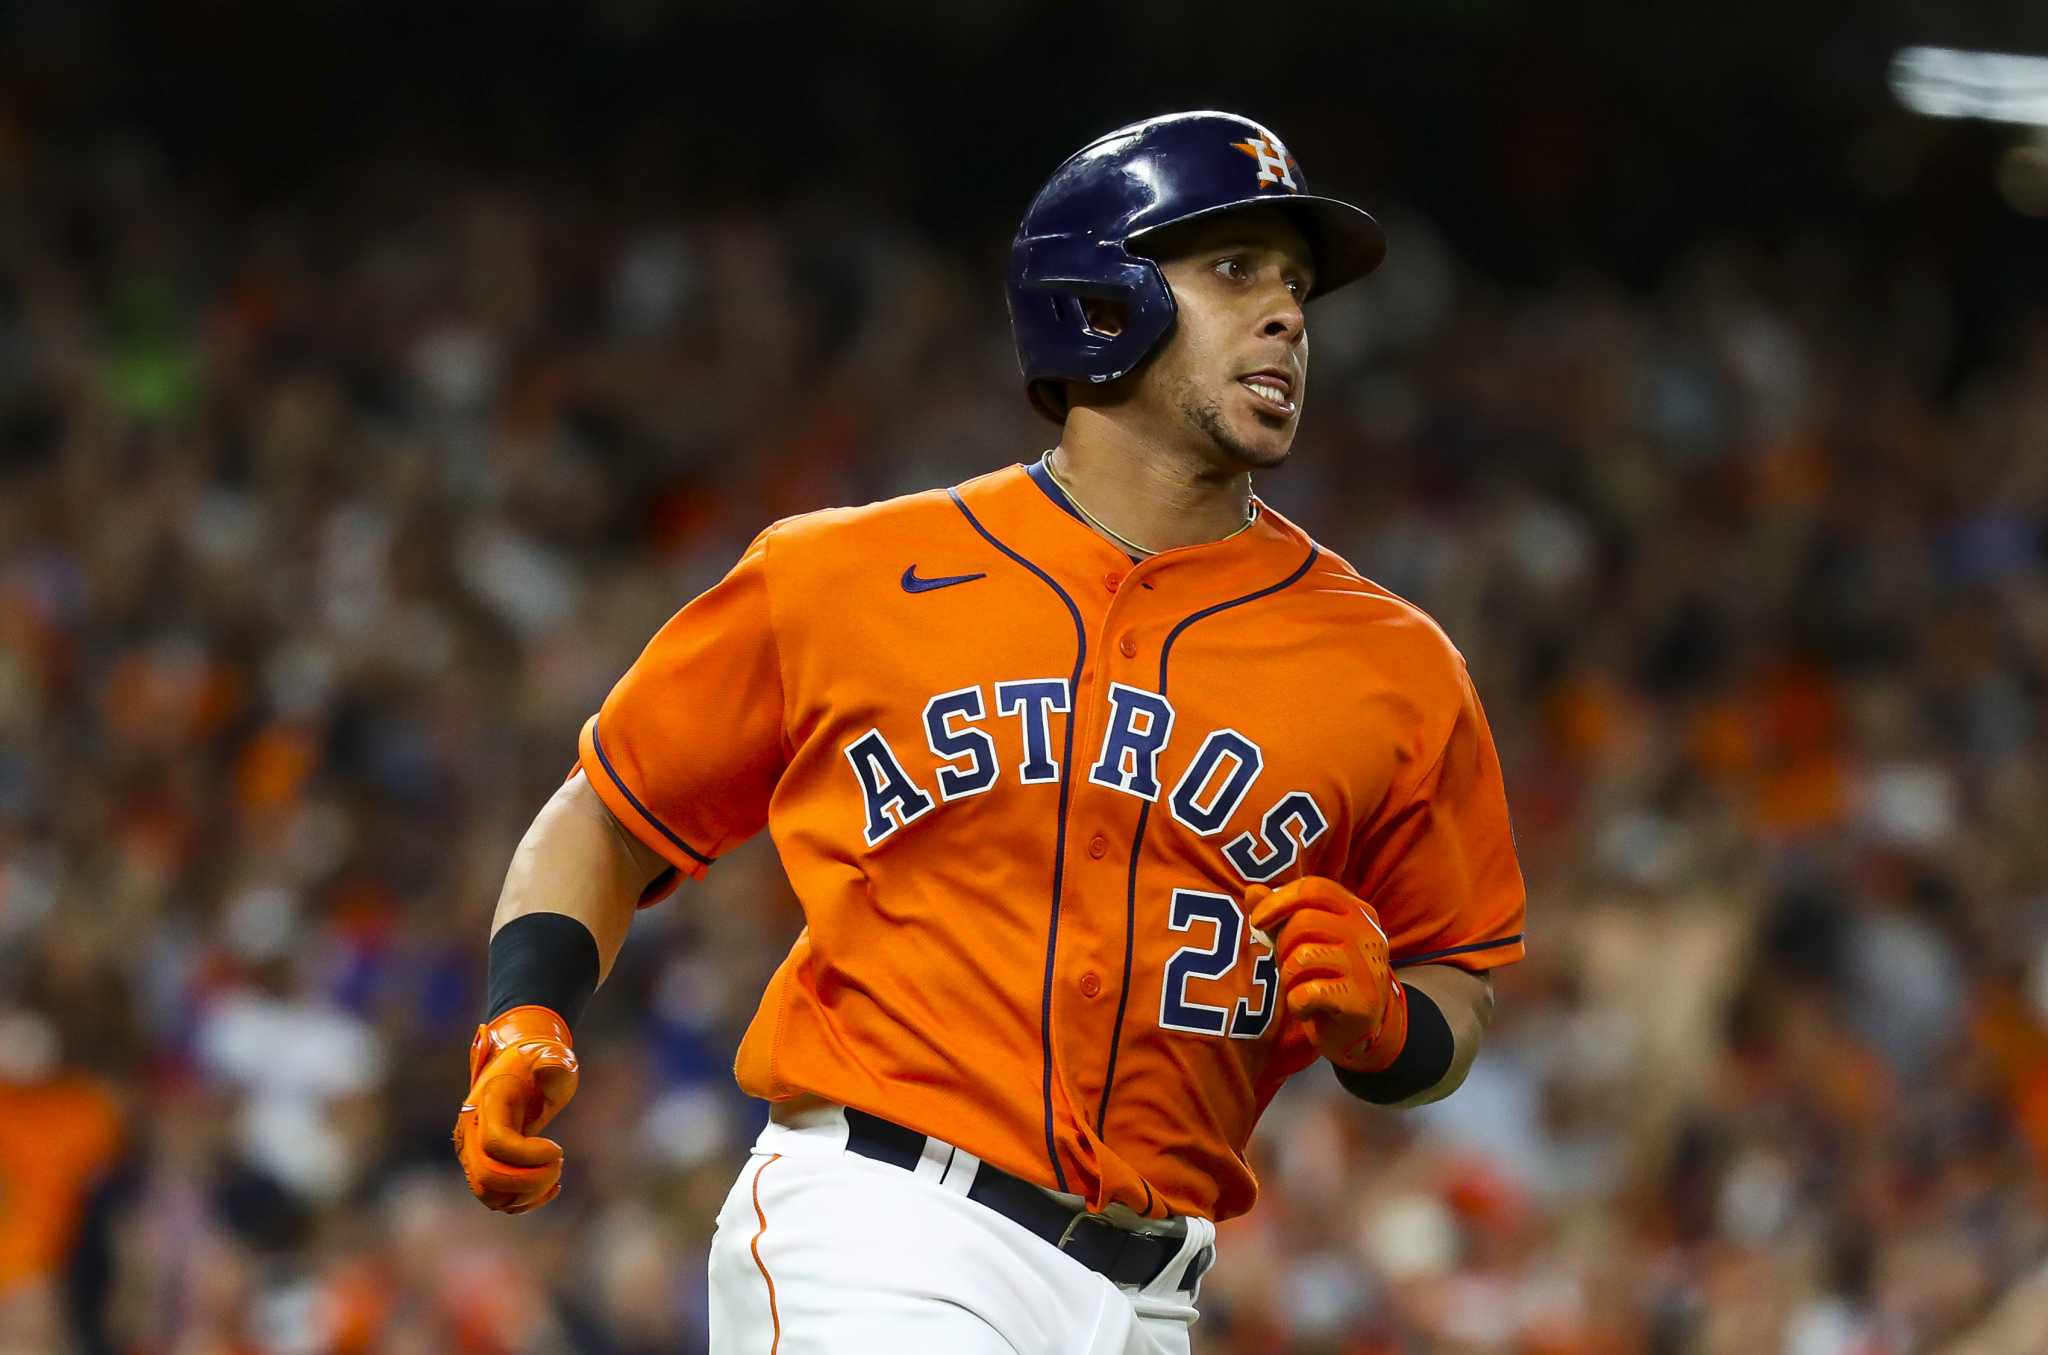 Michael Brantley CRUSHES a solo homer, bringing Astros to a 1-1